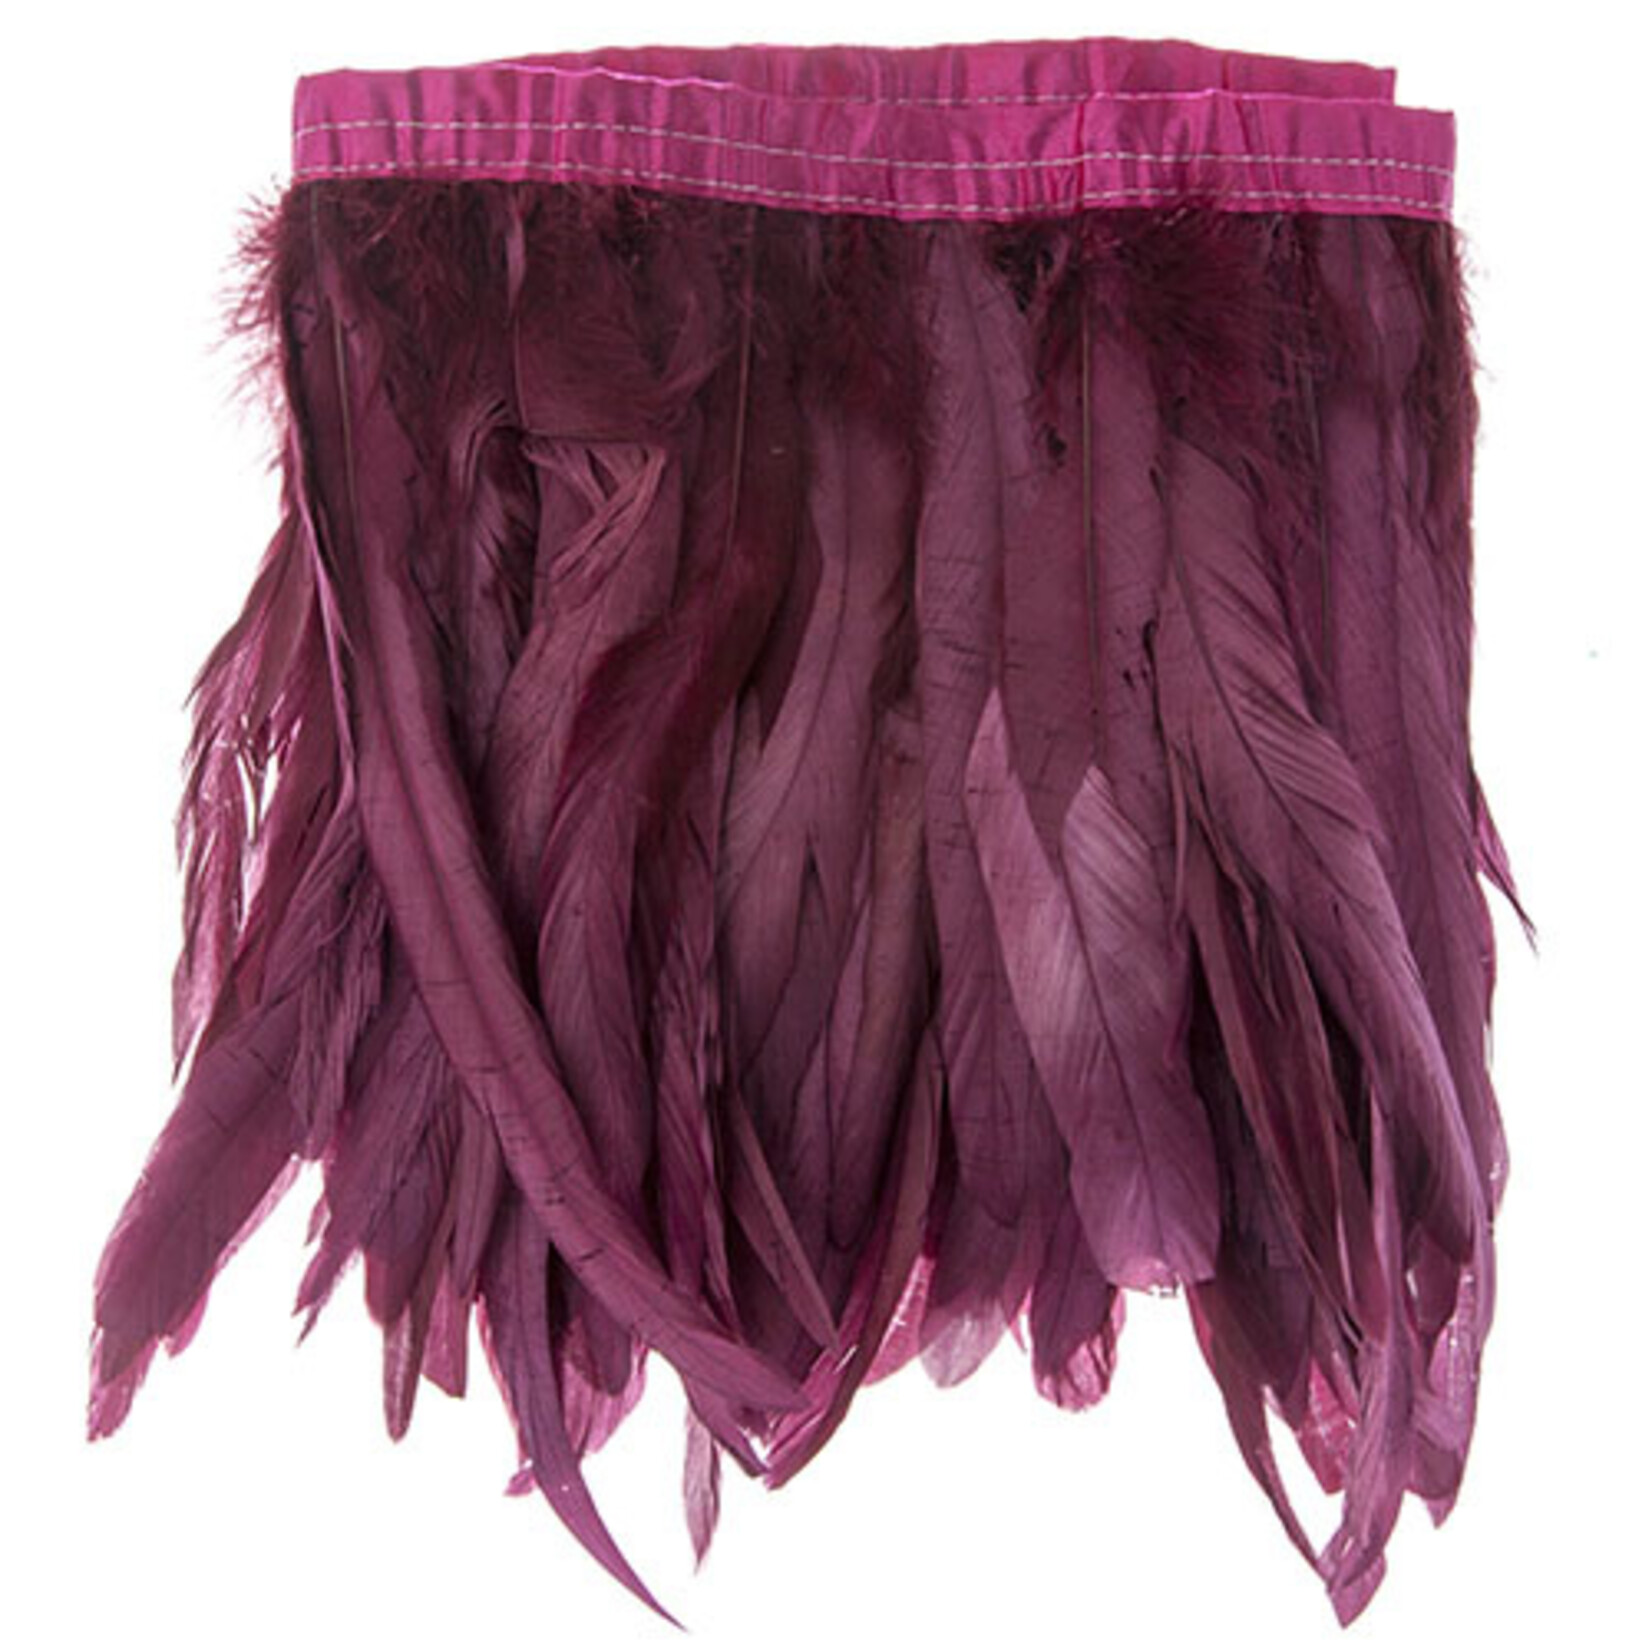 Coque Feathers Value 10-12 Inches 1 Yard  Eggplant